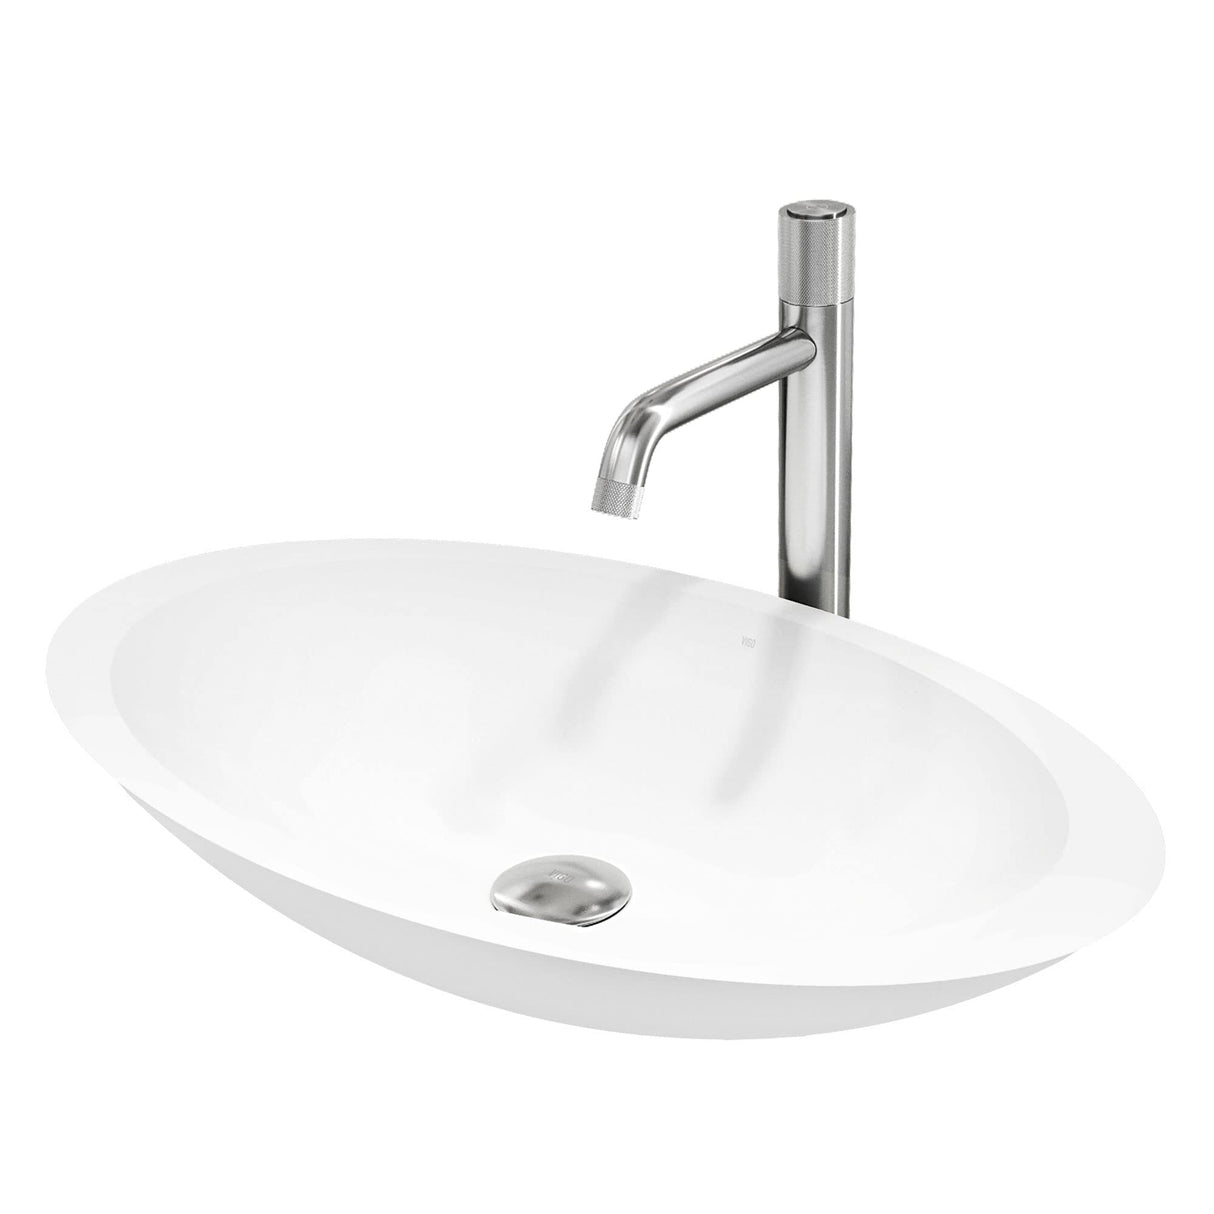 VIGO VGT2051 13.5" L -23.13" W -3.88" H Matte Stone Wisteria Composite Oval Vessel Bathroom Sink in White with Apollo Faucet and Pop-Up Drain in Brushed Nickel